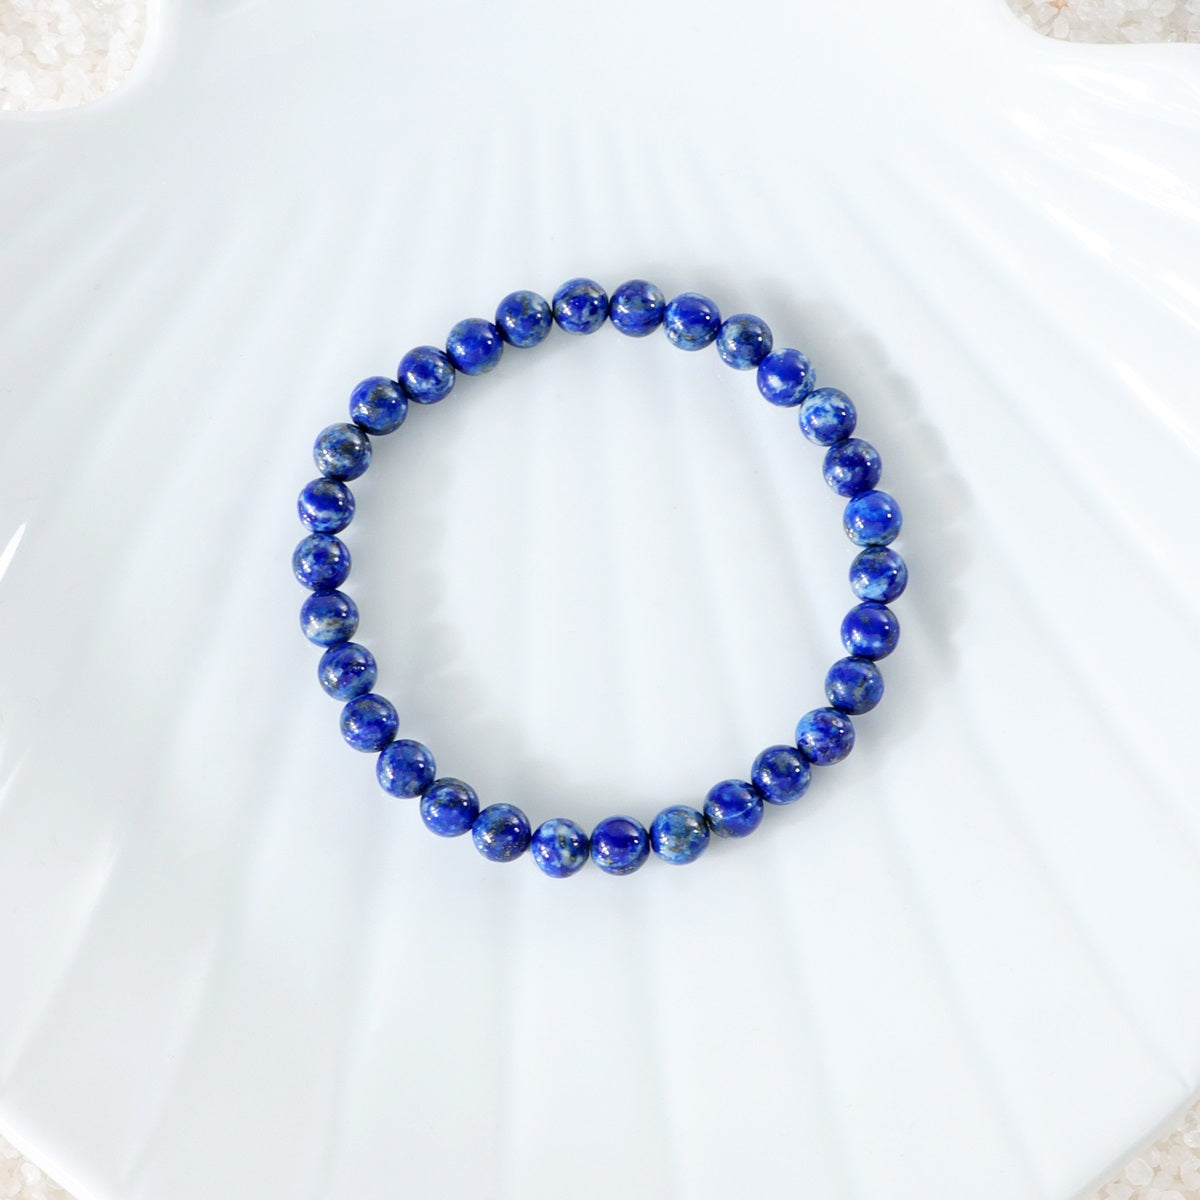 Detailed view of a 6mm Lapis Lazuli bead, showcasing the deep blue hue and gold flecks, highlighting the exquisite craftsmanship in the bracelet